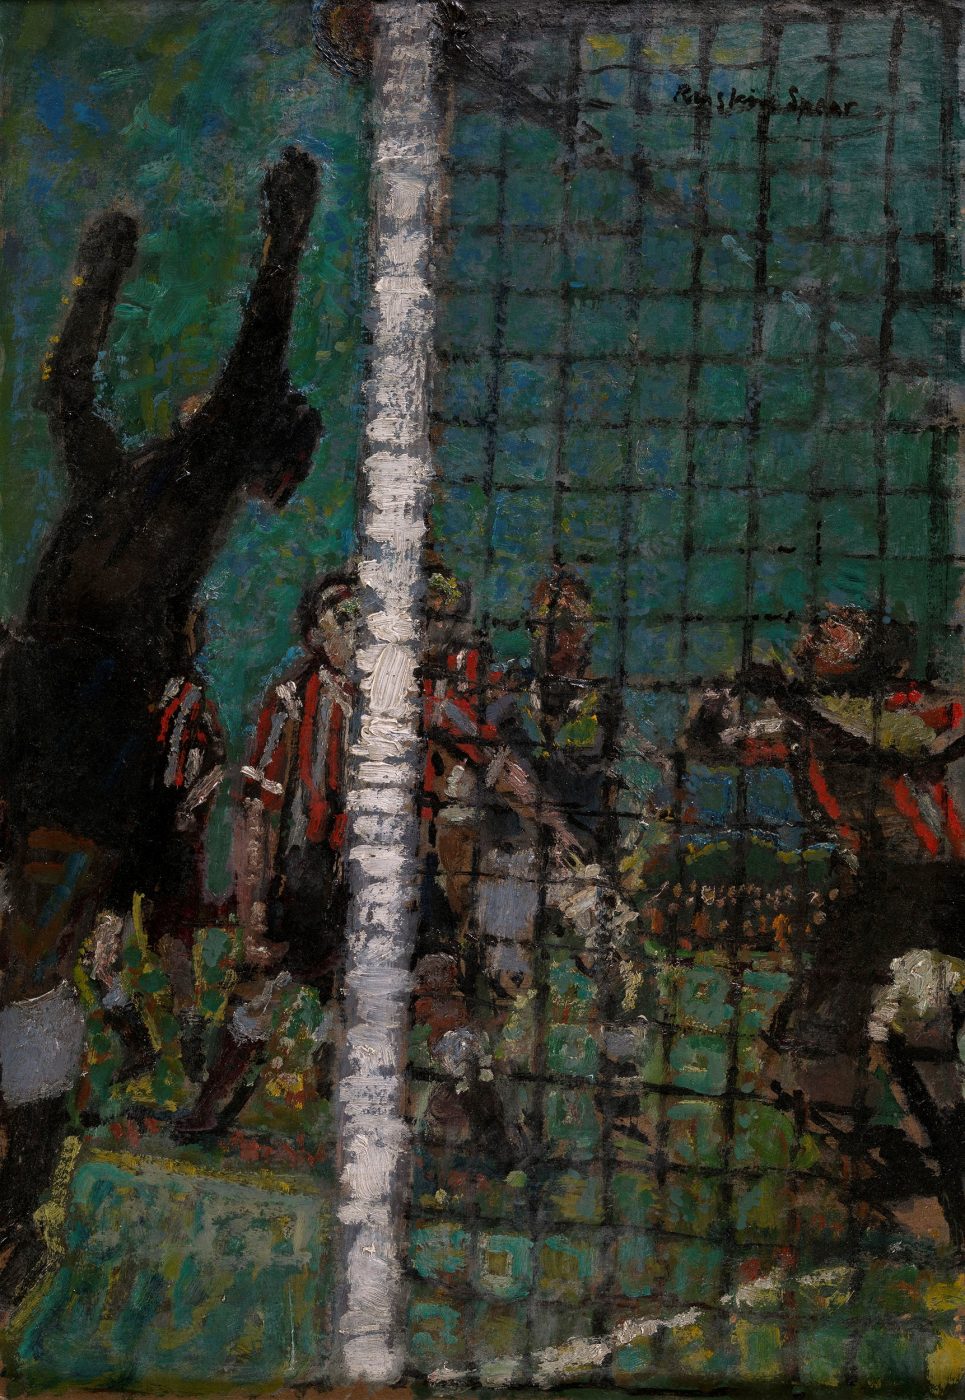 Ruskin Spear, CBE RA (1911-1990), The Football Match - Sold to the National Museum of Football, Manchester